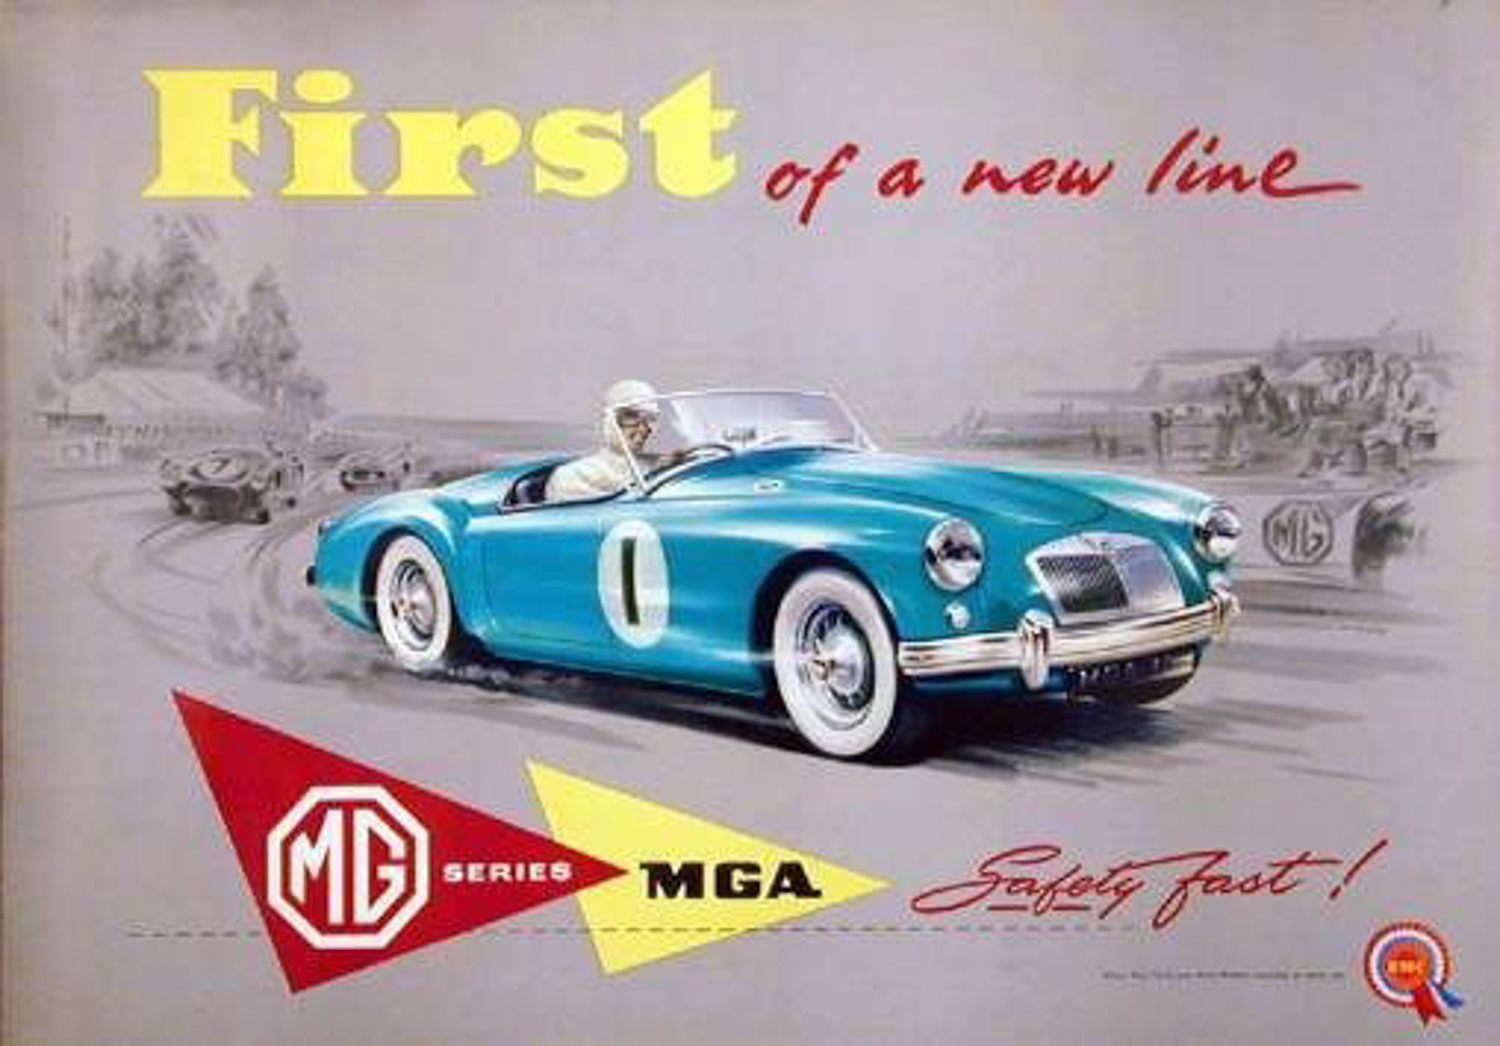 The sleek design of the MGA was immediately popular, and MG was interested in seeing it in competition. 